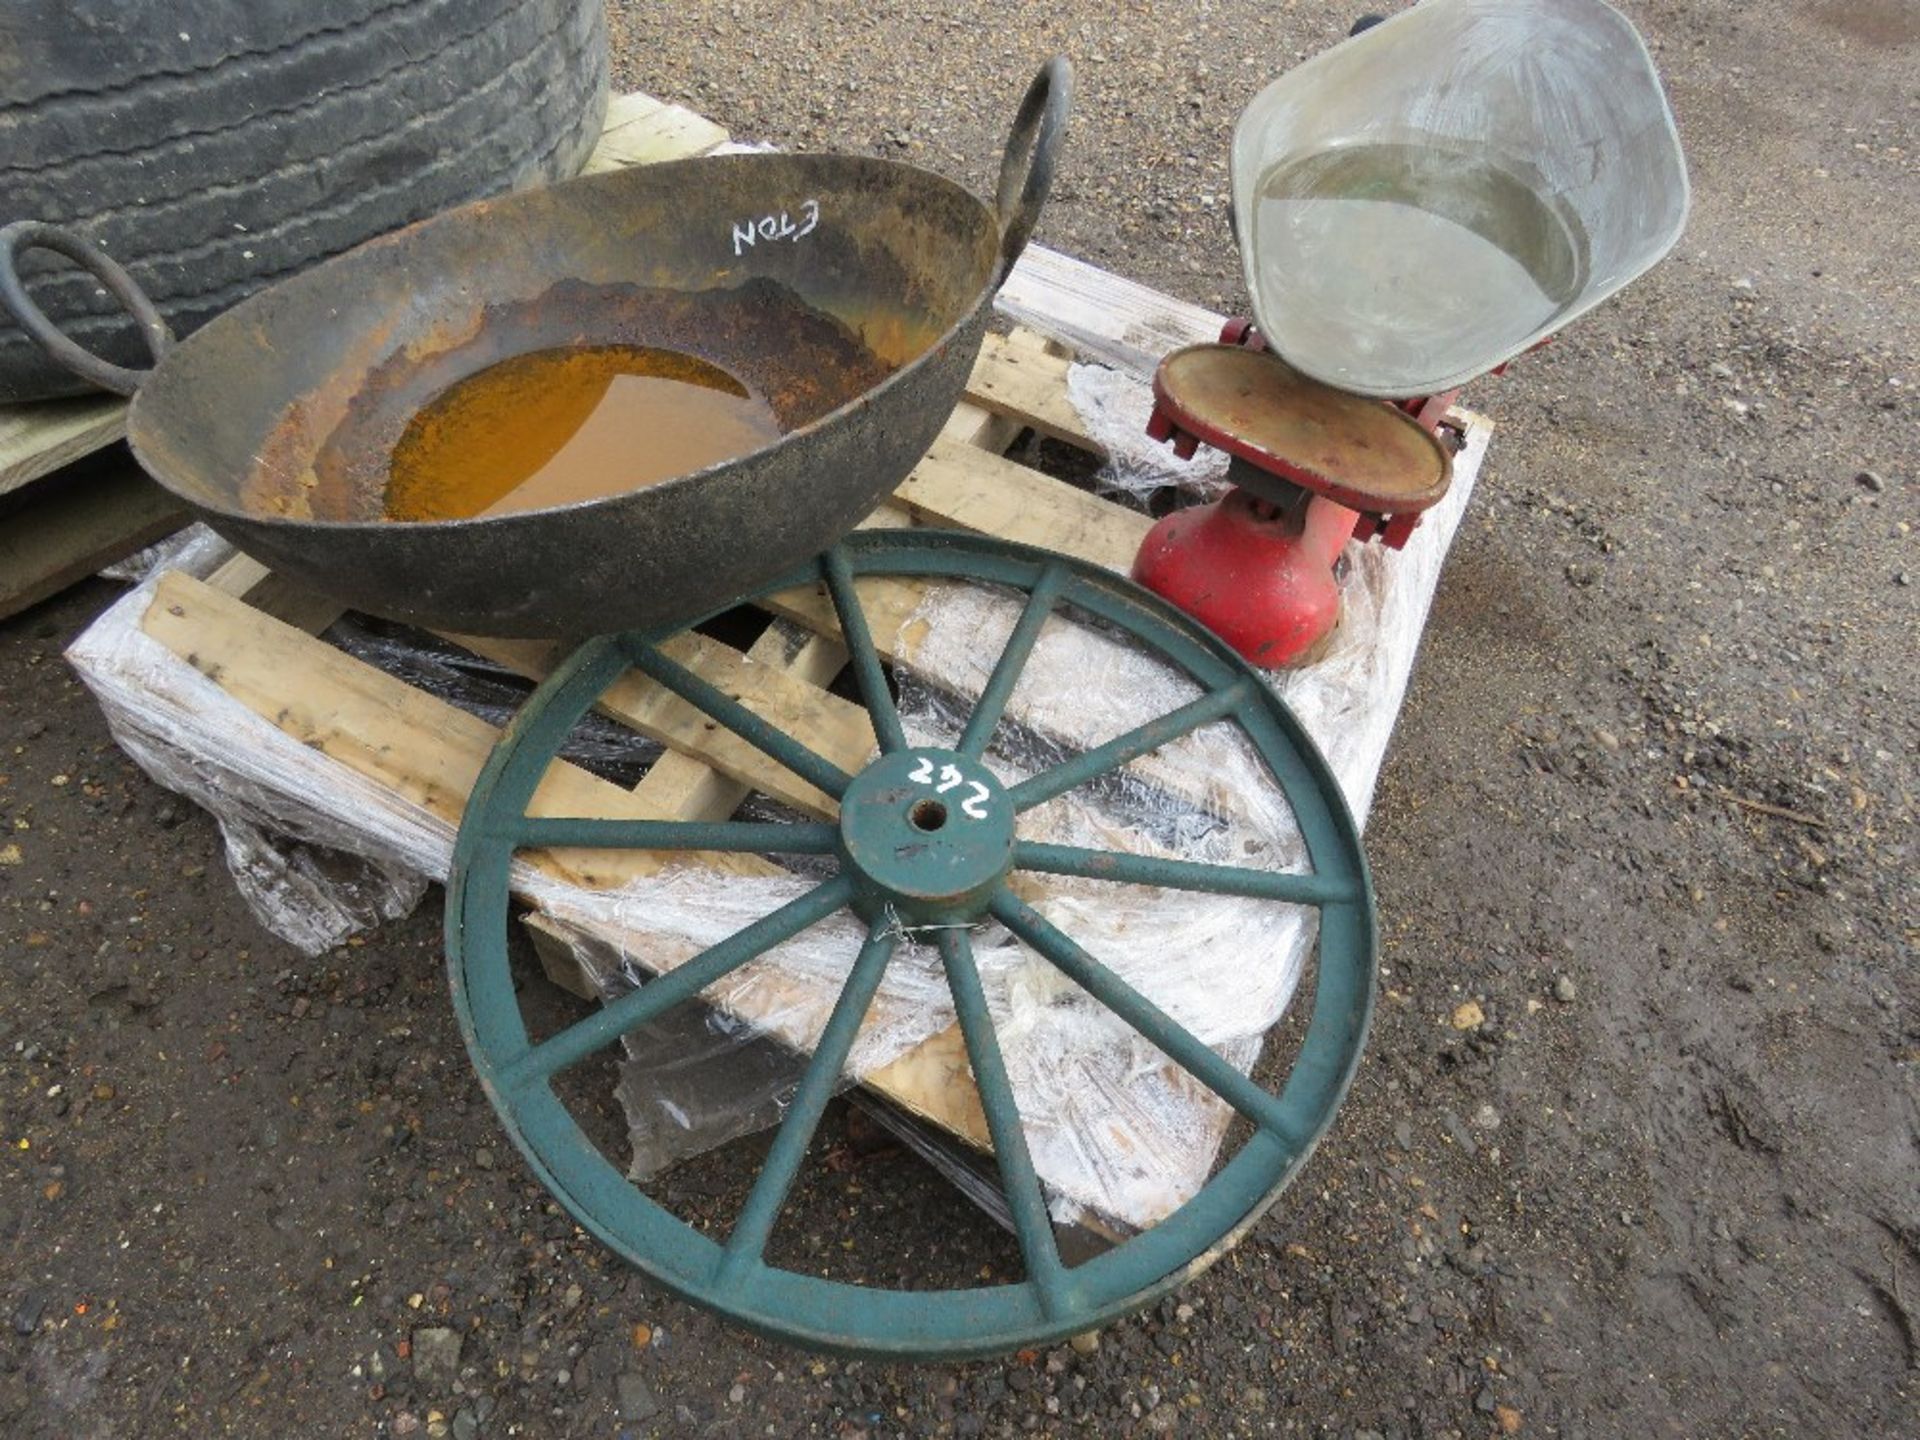 3 X DECORATIVE GARDEN ITEMS: CAST WHEEL, WOK AND OLD SCALES. THIS LOT IS SOLD UNDER THE AUCTIONEE - Image 3 of 3